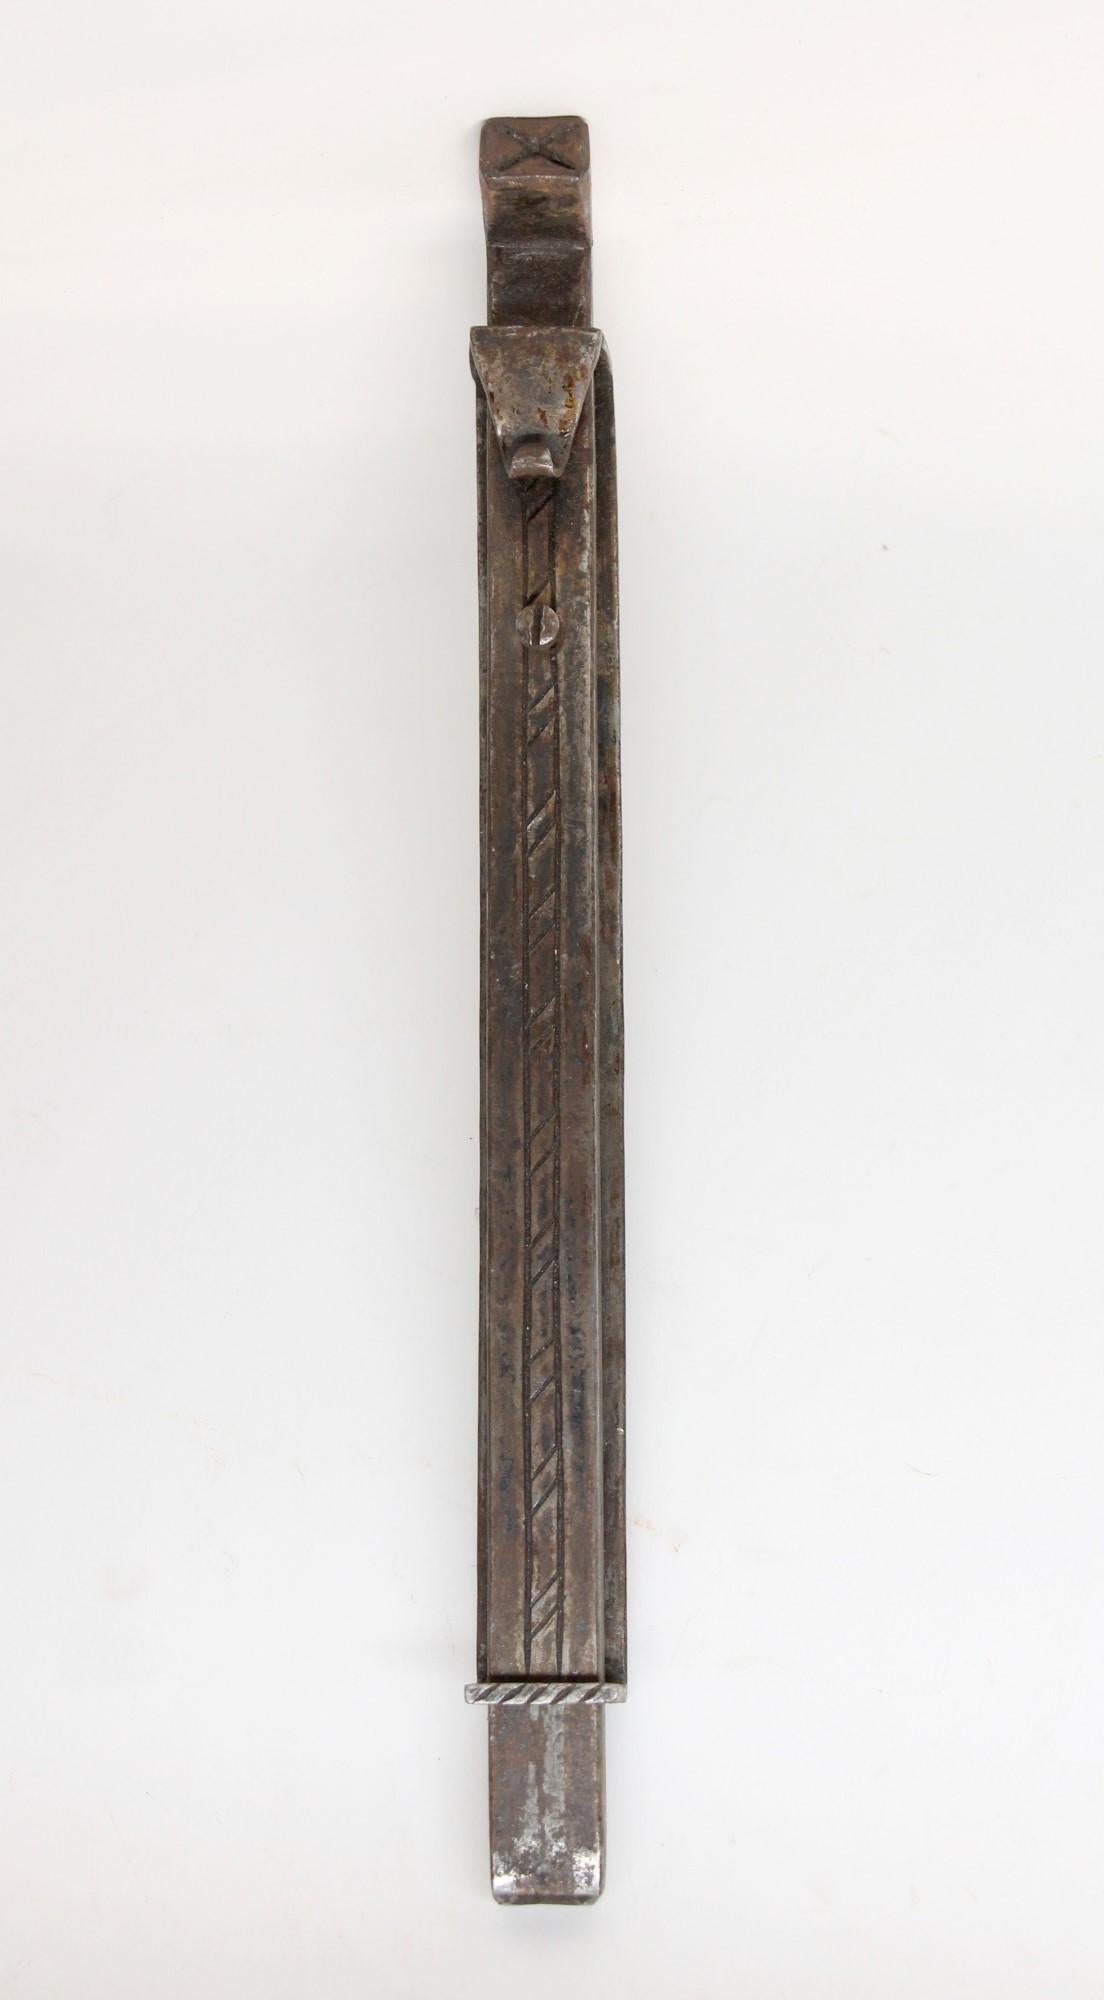 Aesthetic Movement Pair Forged Iron Door / Gate Slide Bolts by Samuel Yellin Early 20th Century For Sale